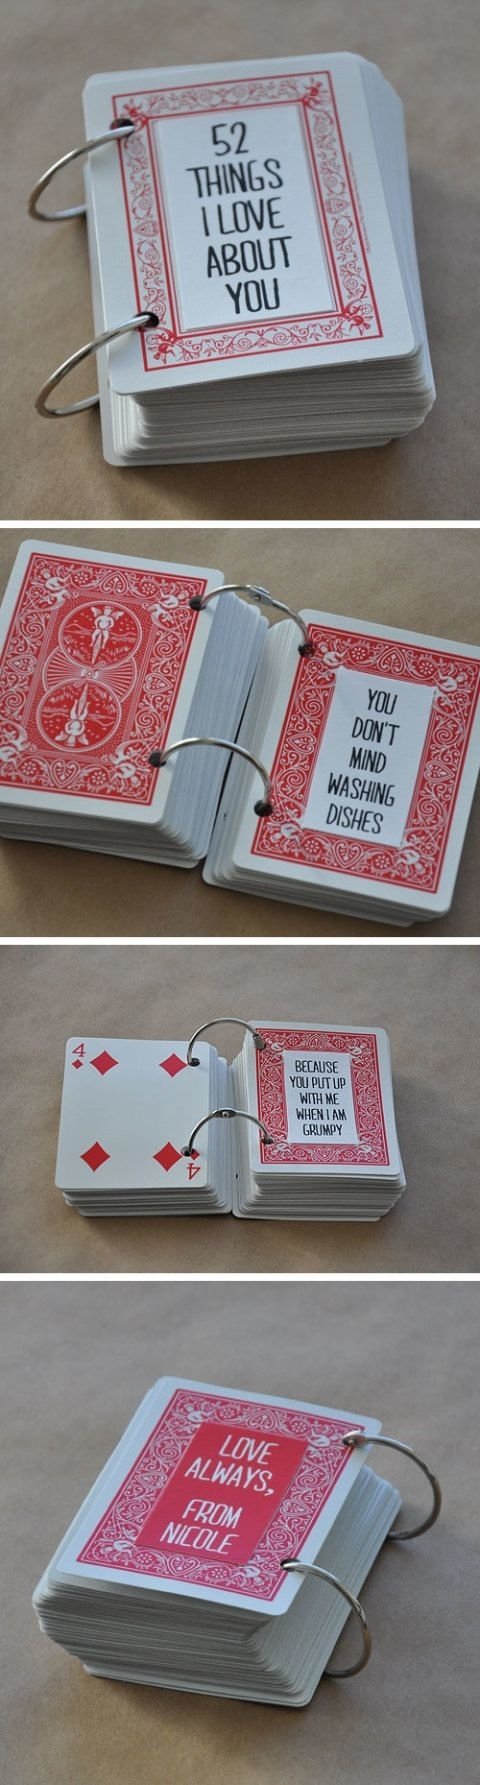 10 Spectacular Cute Valentine Ideas For Her 132 best gift ideas for my husband images on pinterest diy 2022